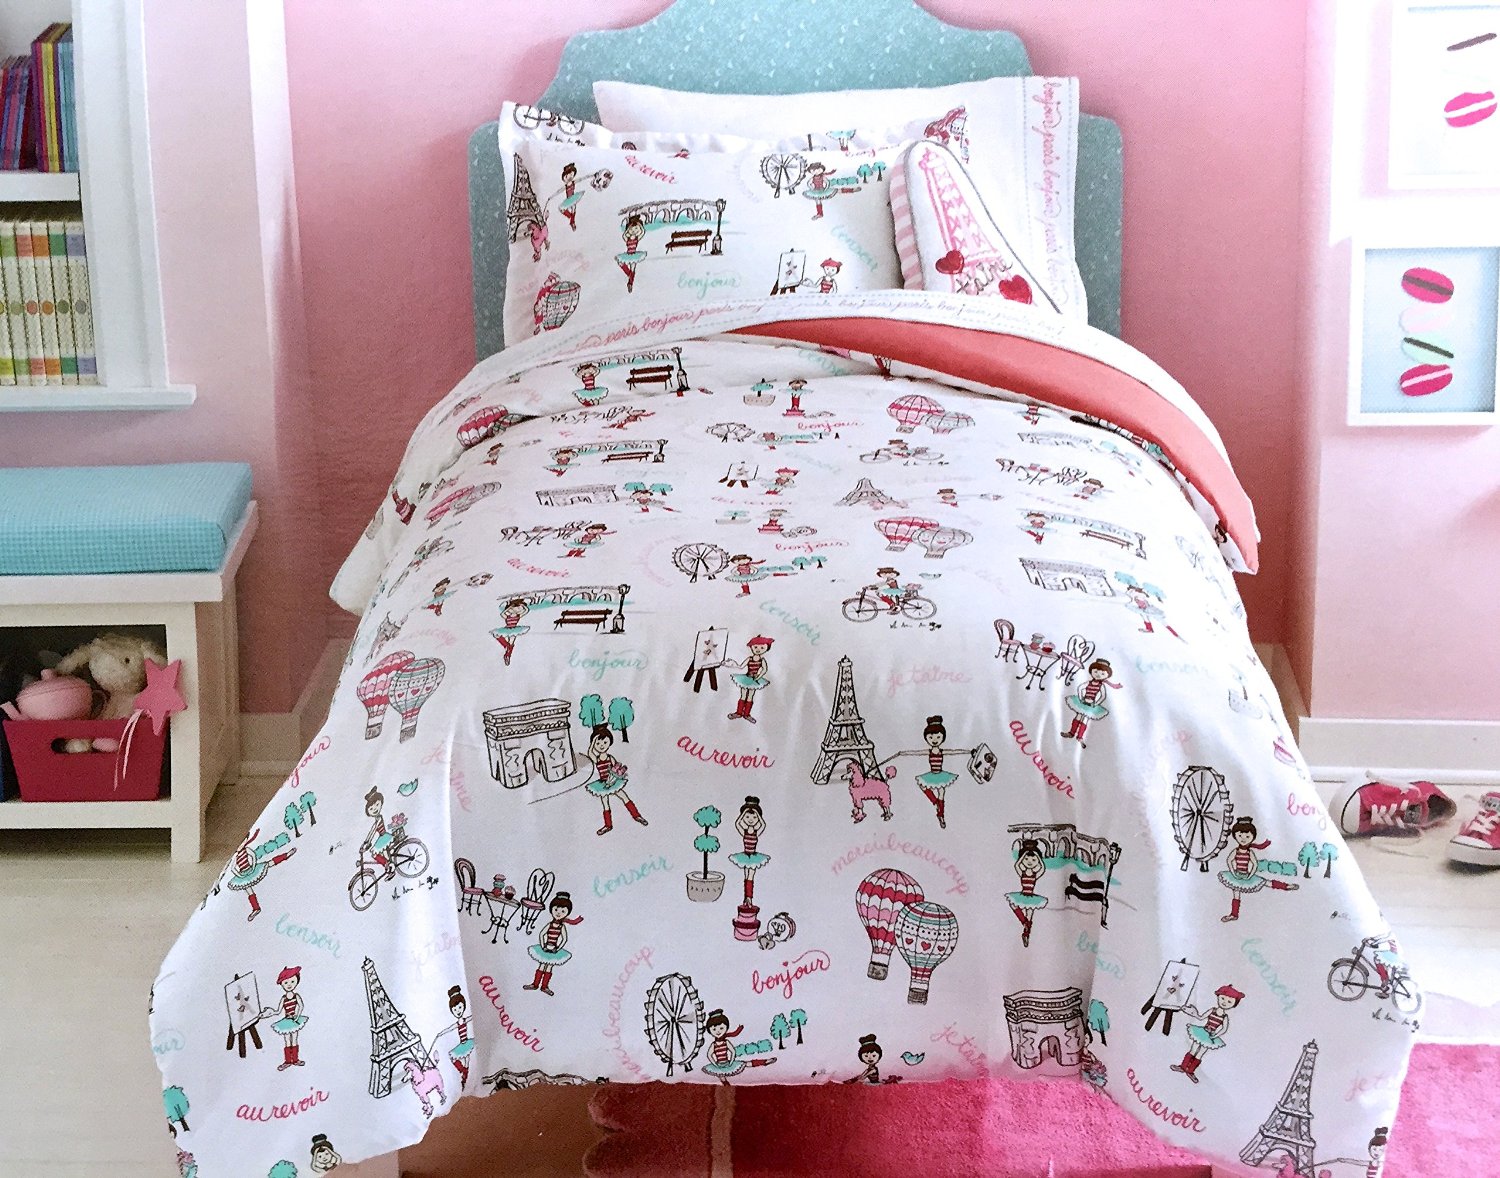 Paris & Eiffel Tower Themed Bedding for Less